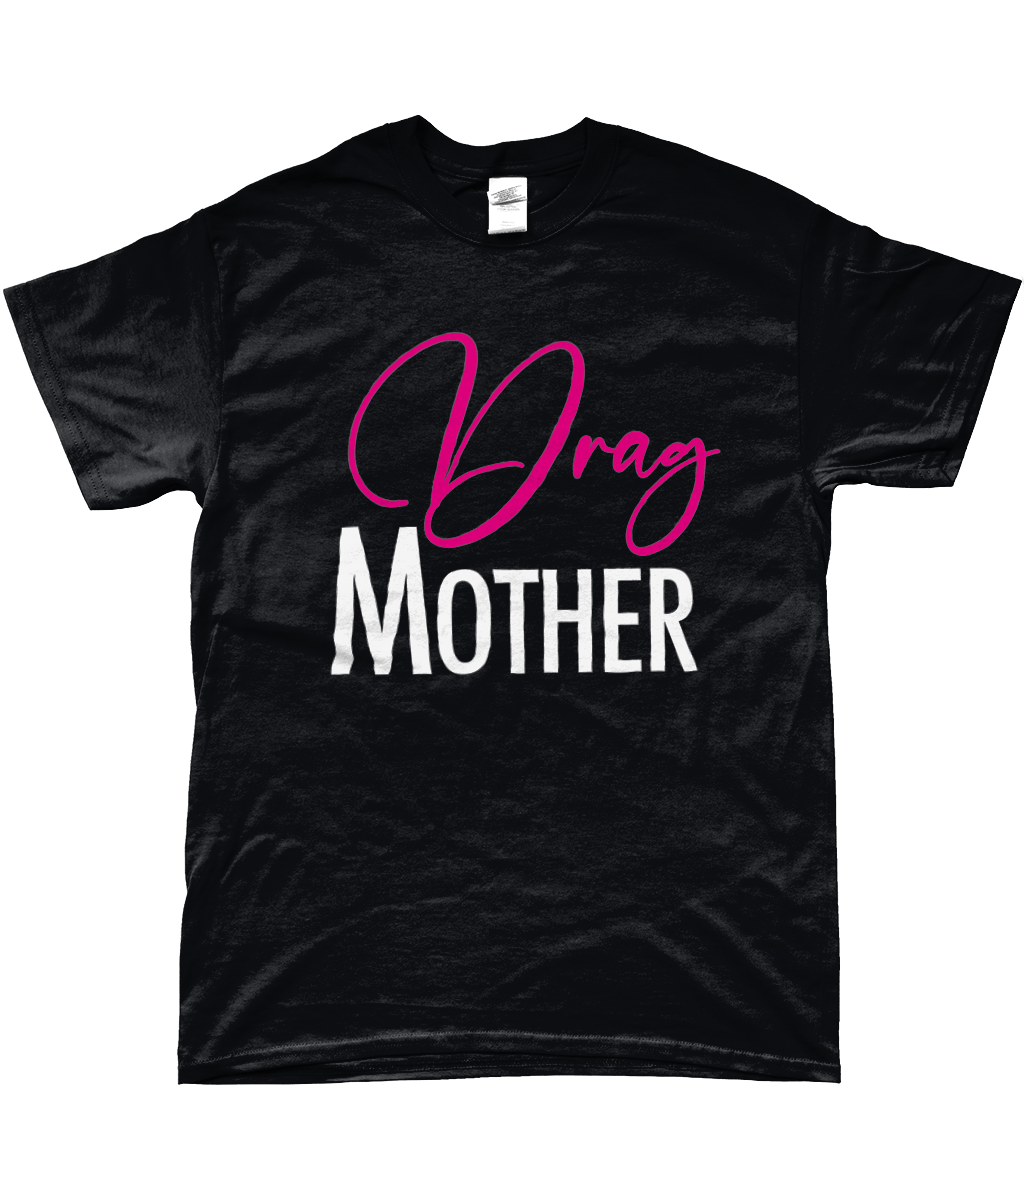 Snatched - Drag Mother T-Shirt